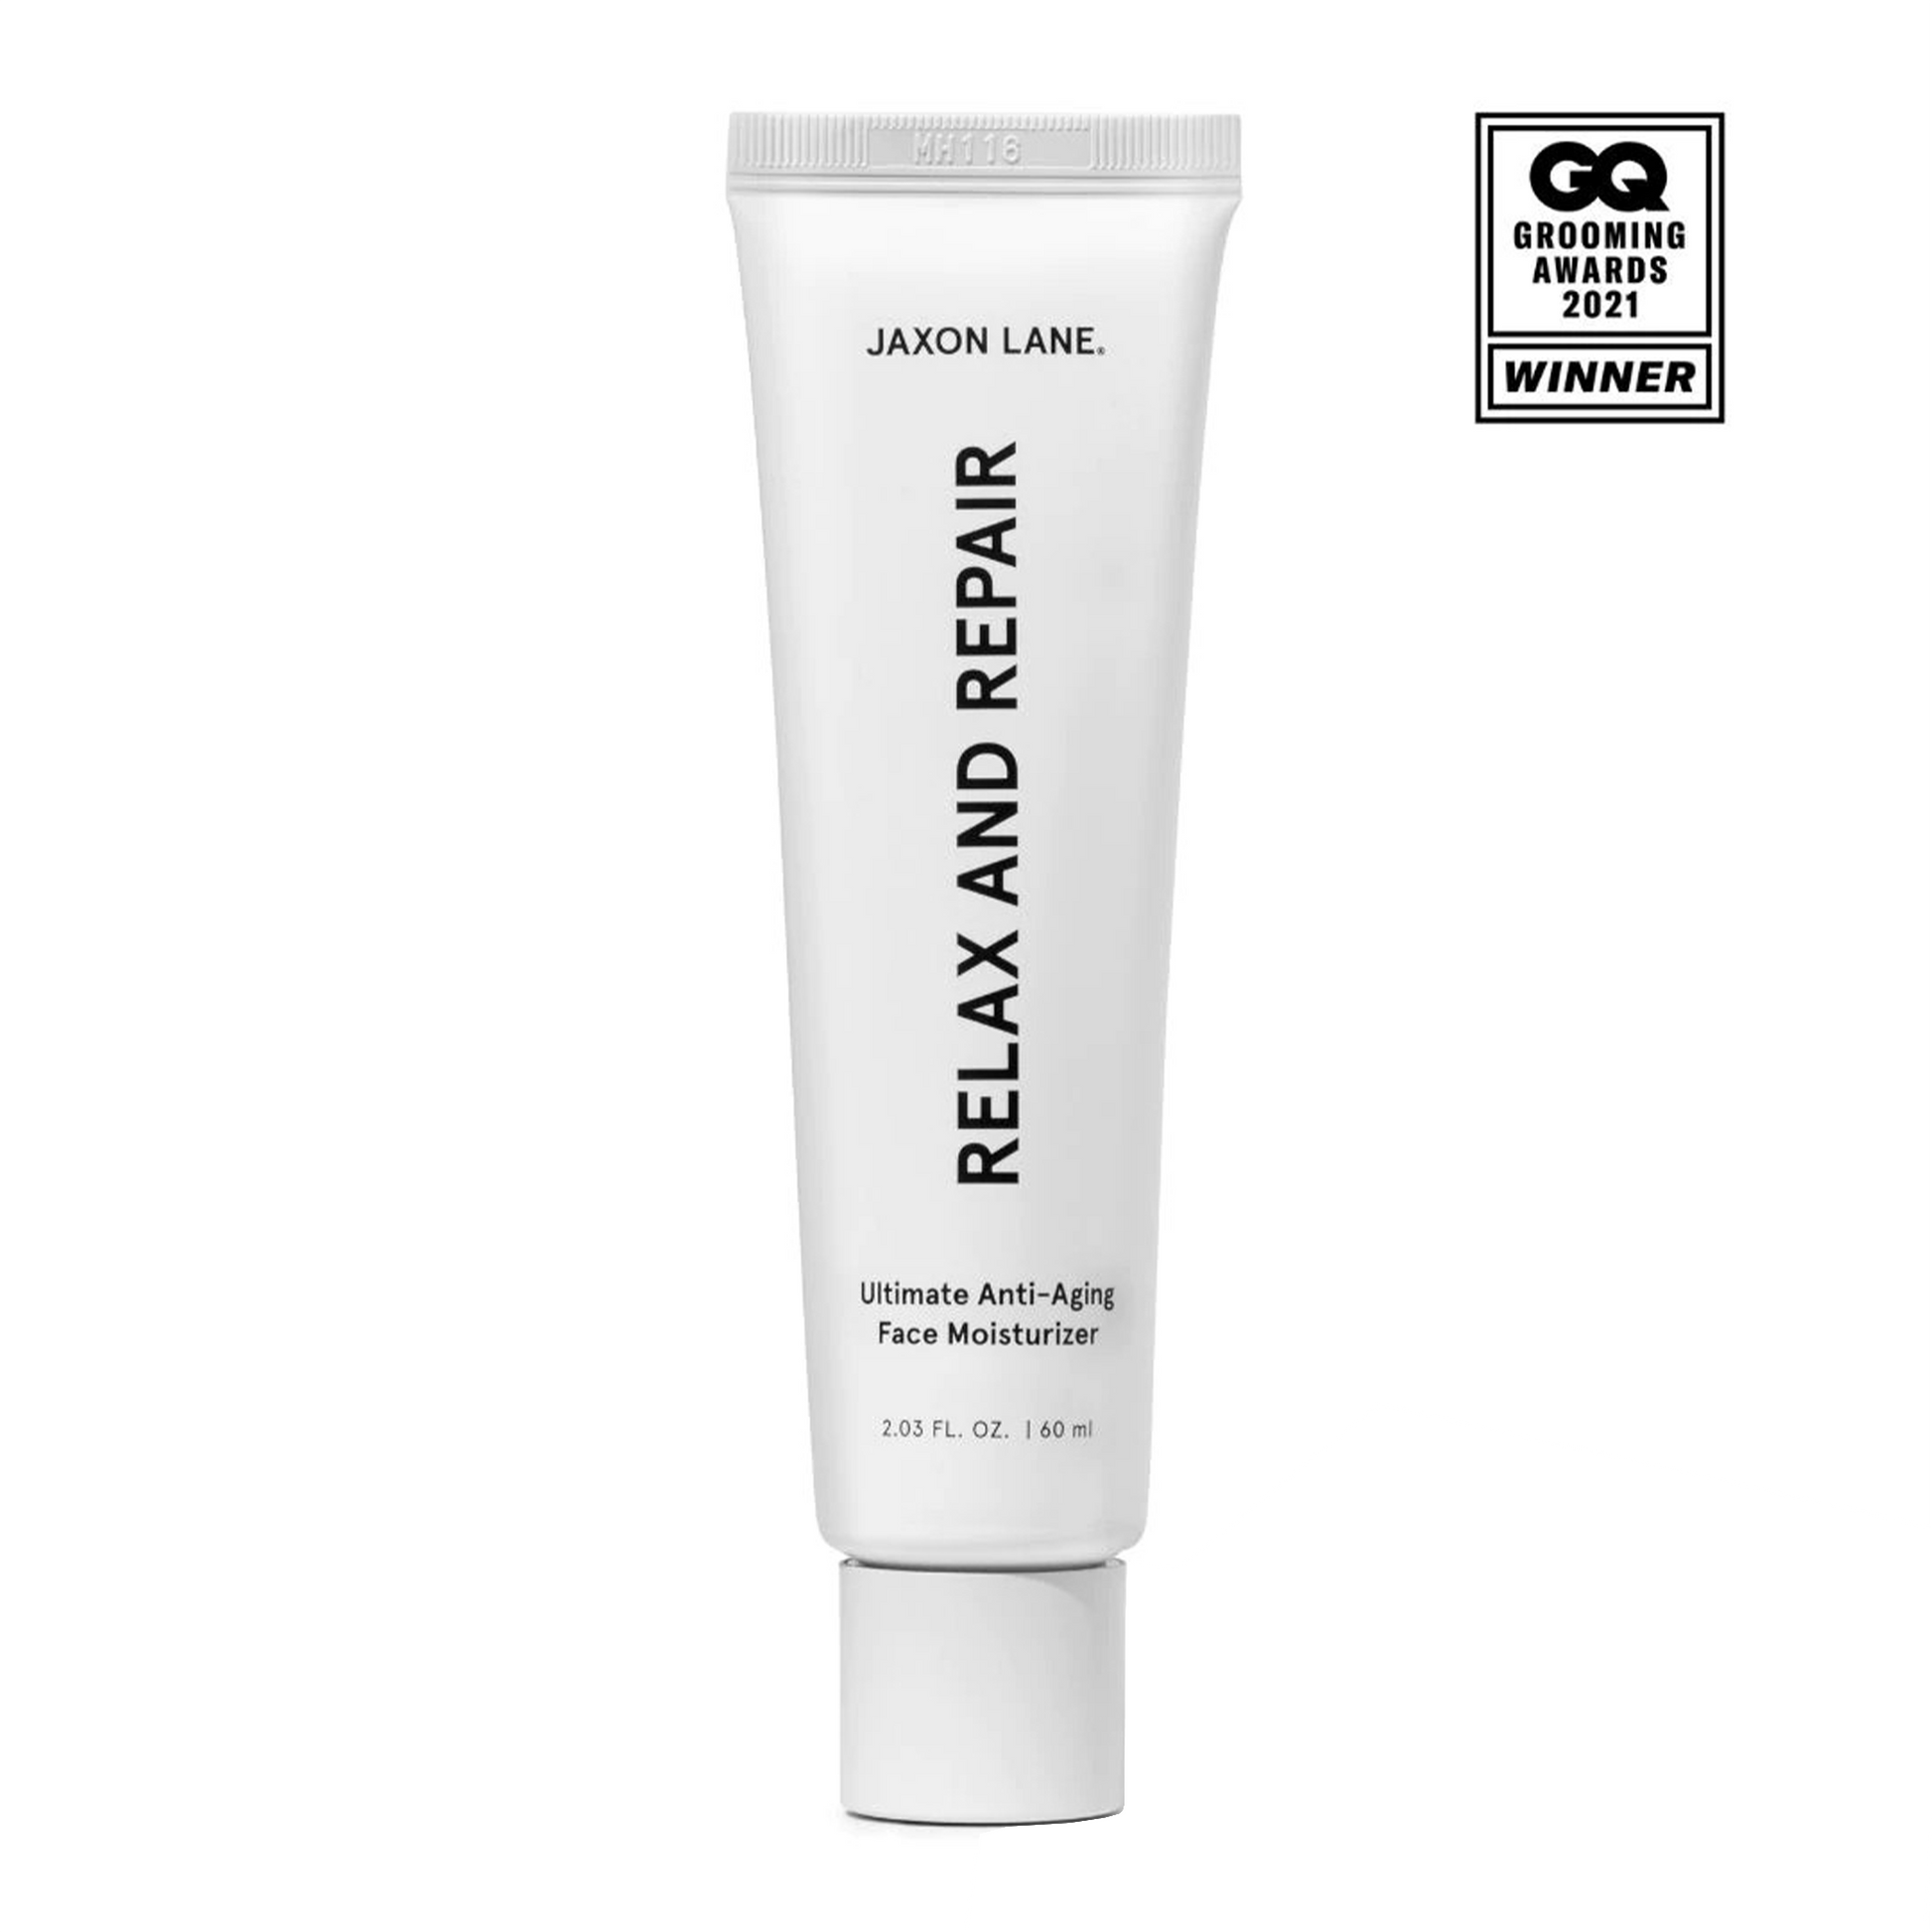 Jaxon Lane Anti-Aging Face Moisturizer: Our powerhouse anti-aging moisturizer hydrates without being oily, and is packed with ingredients proven to prevent and repair the signs of aging. Winner of GQ Award for "Best Moisturizer".